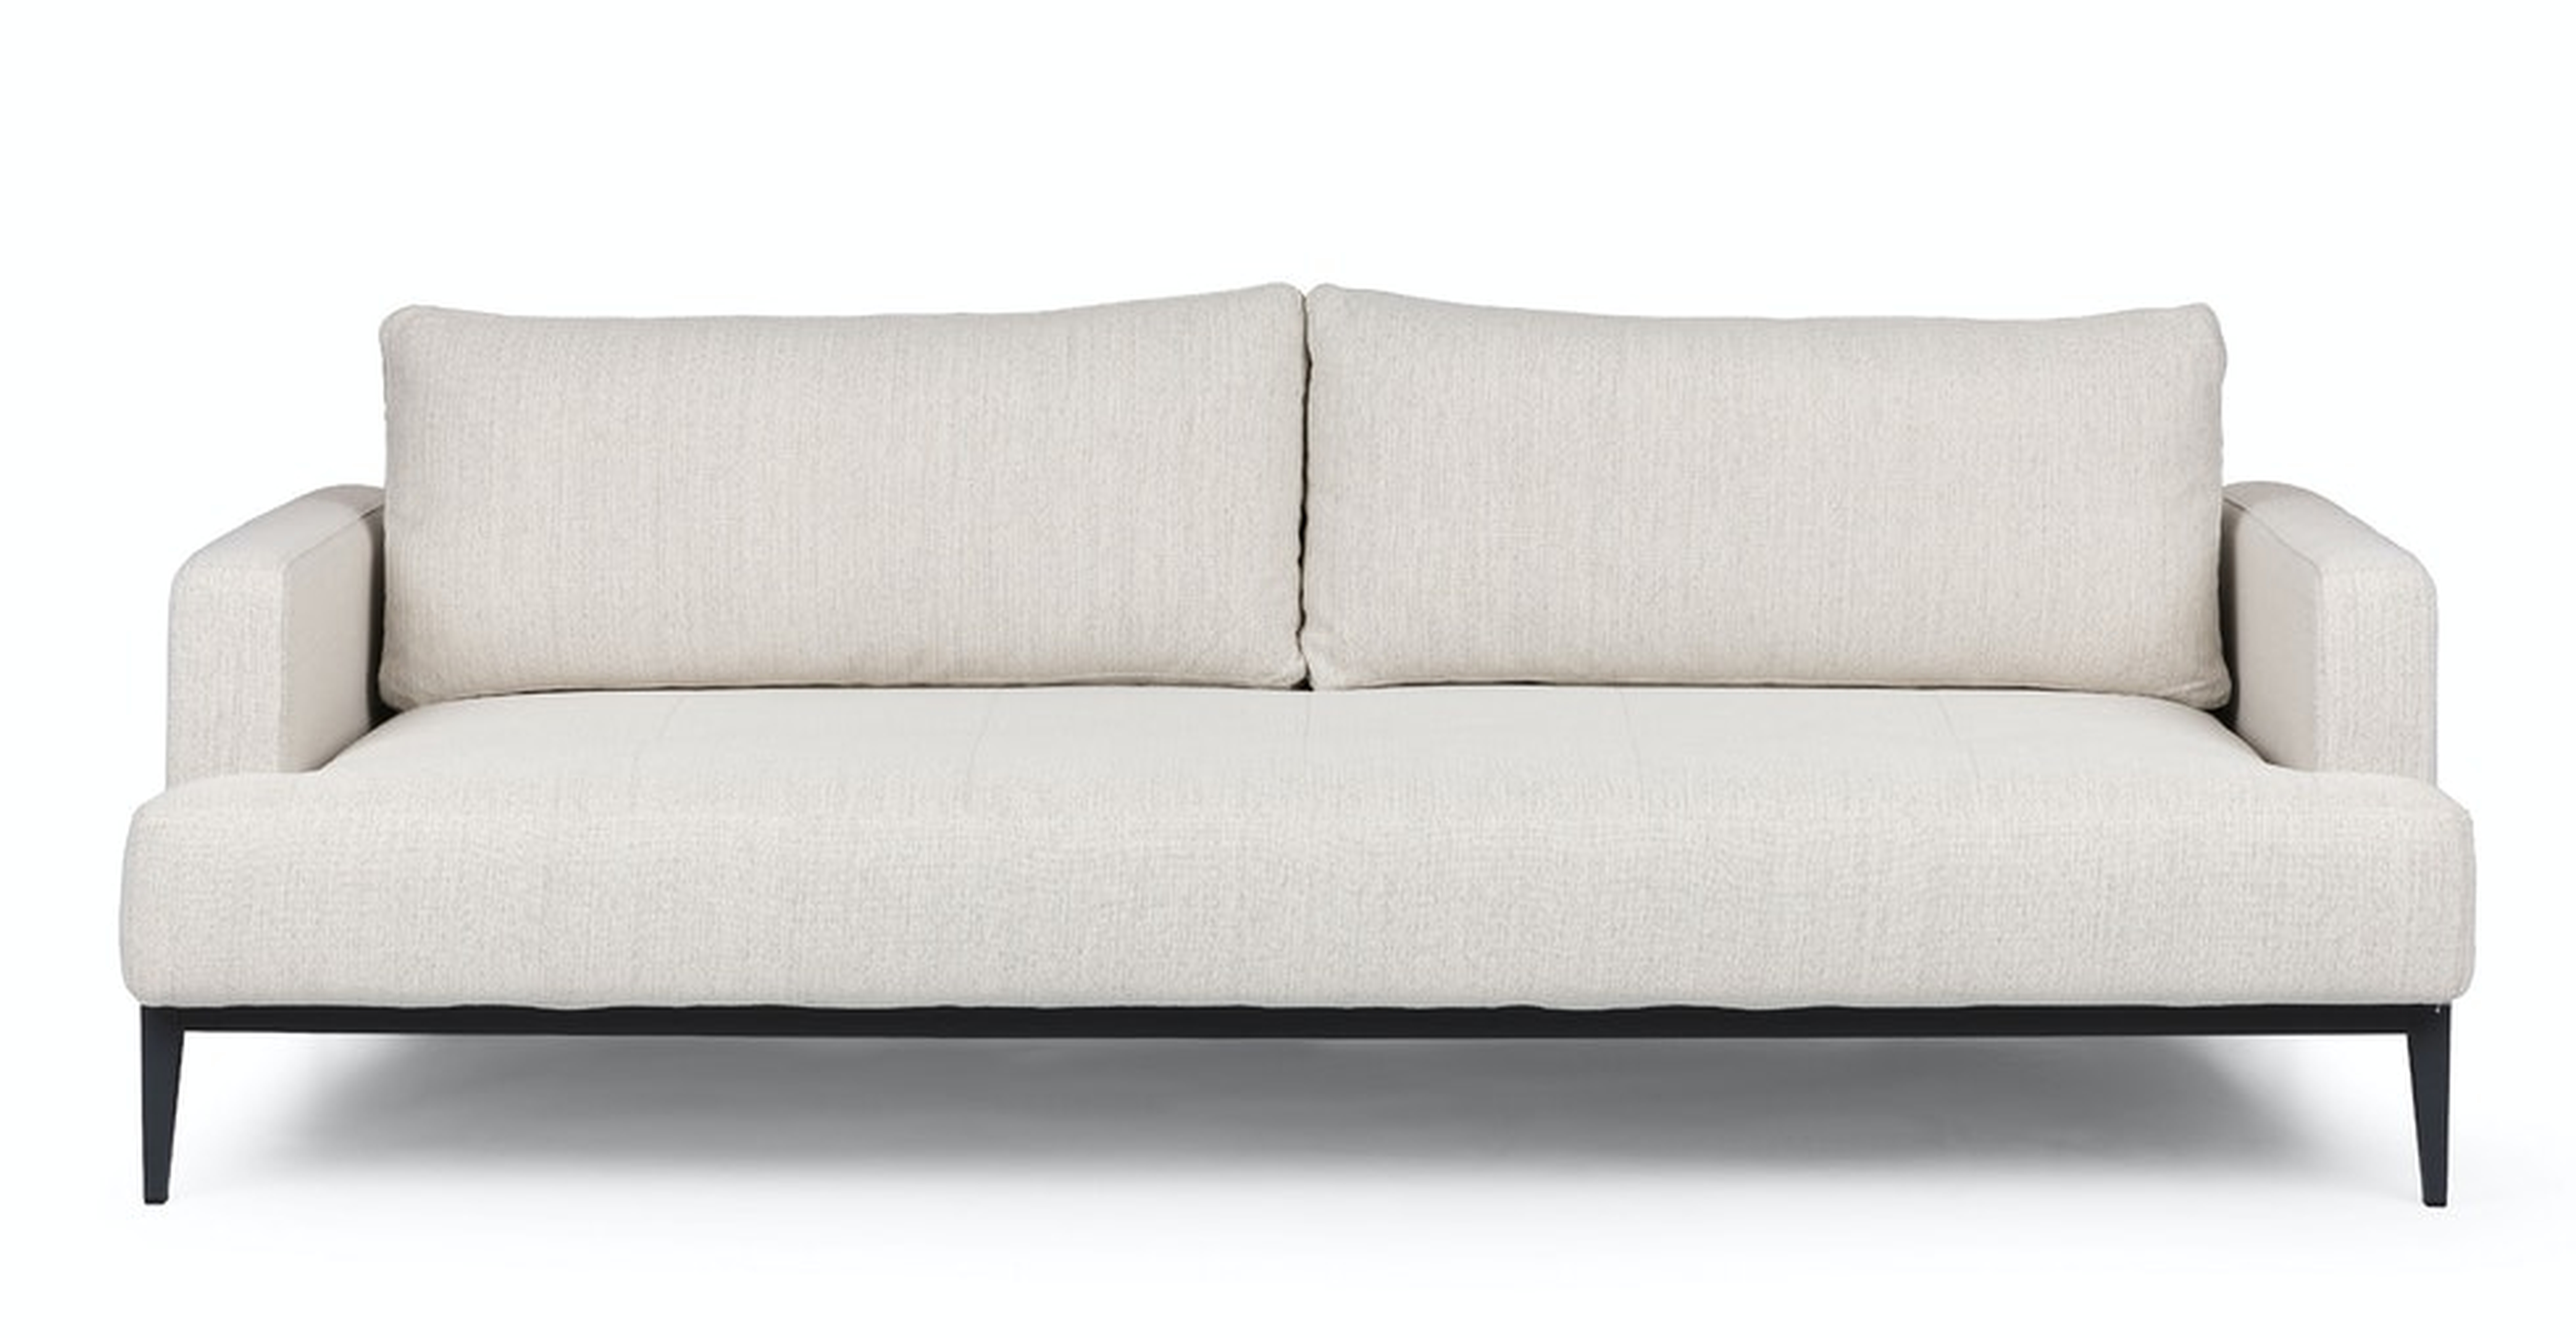 Solna Atelier Ivory Sofa Bed - Article